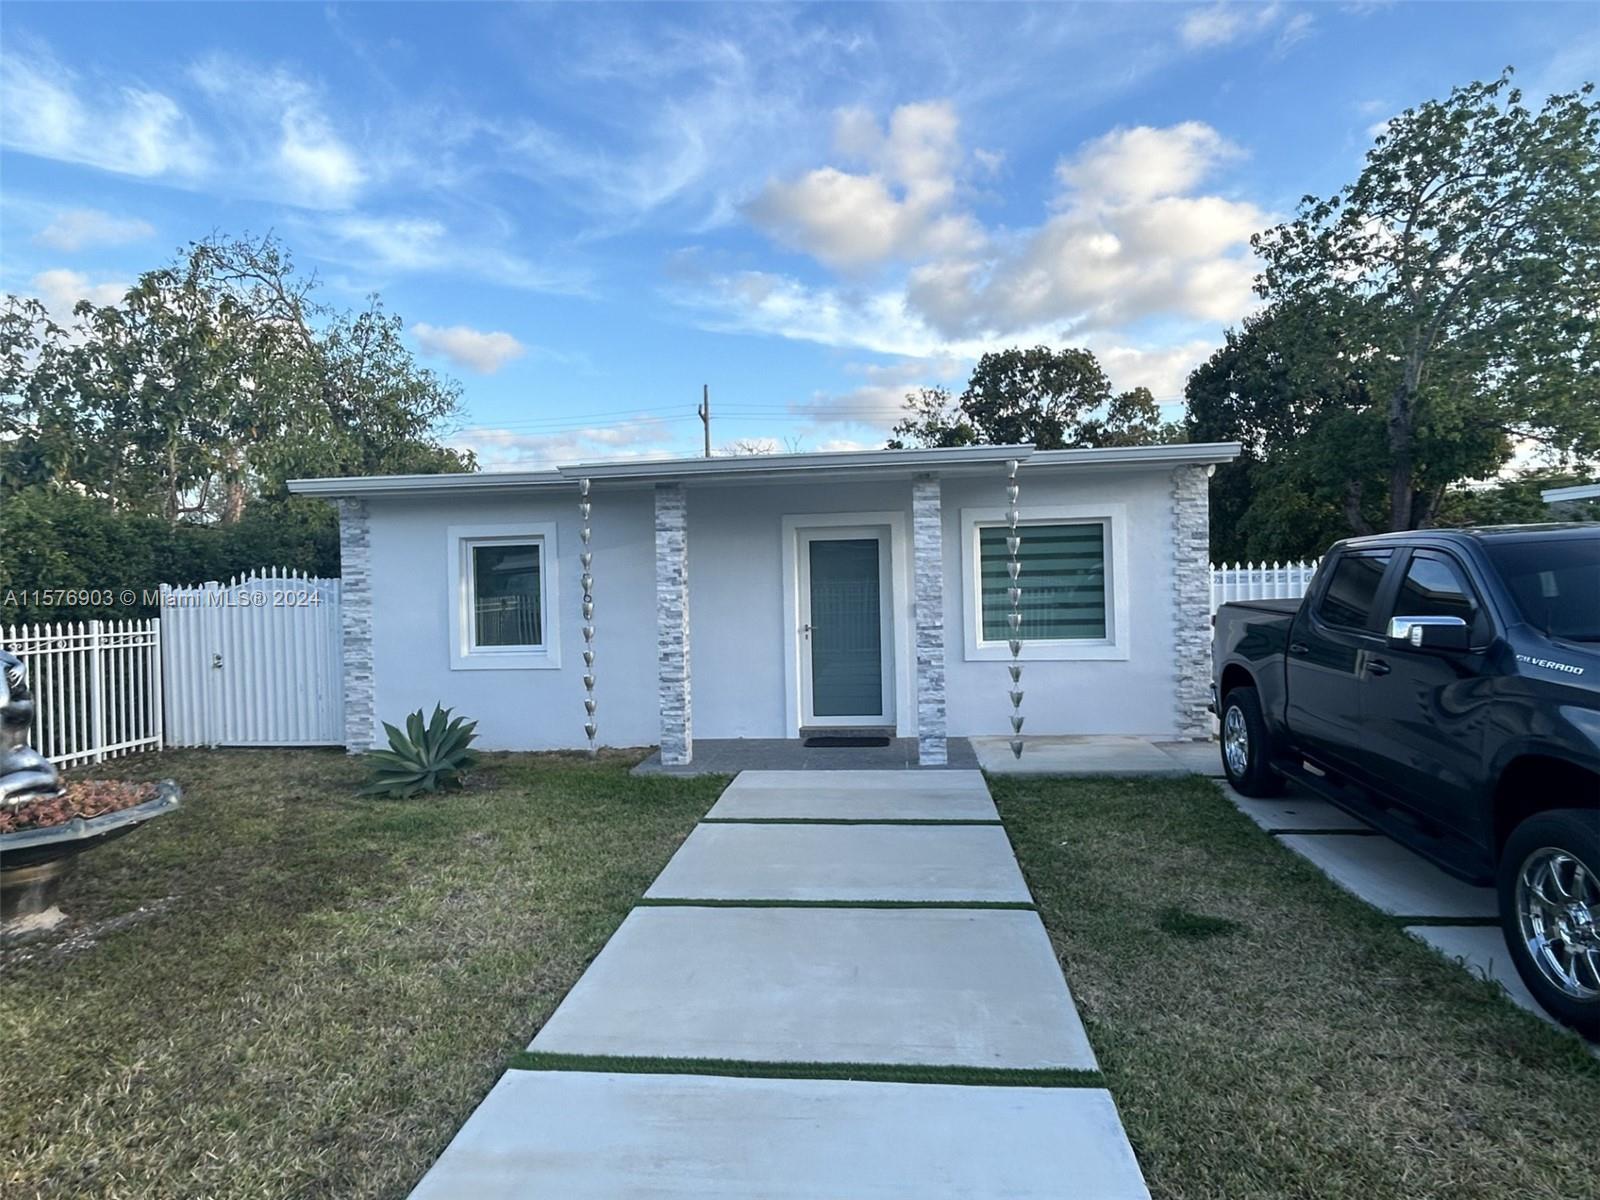 Fully renovated home with impact windows and doors. 2 Bedrooms and 2 bathrooms.